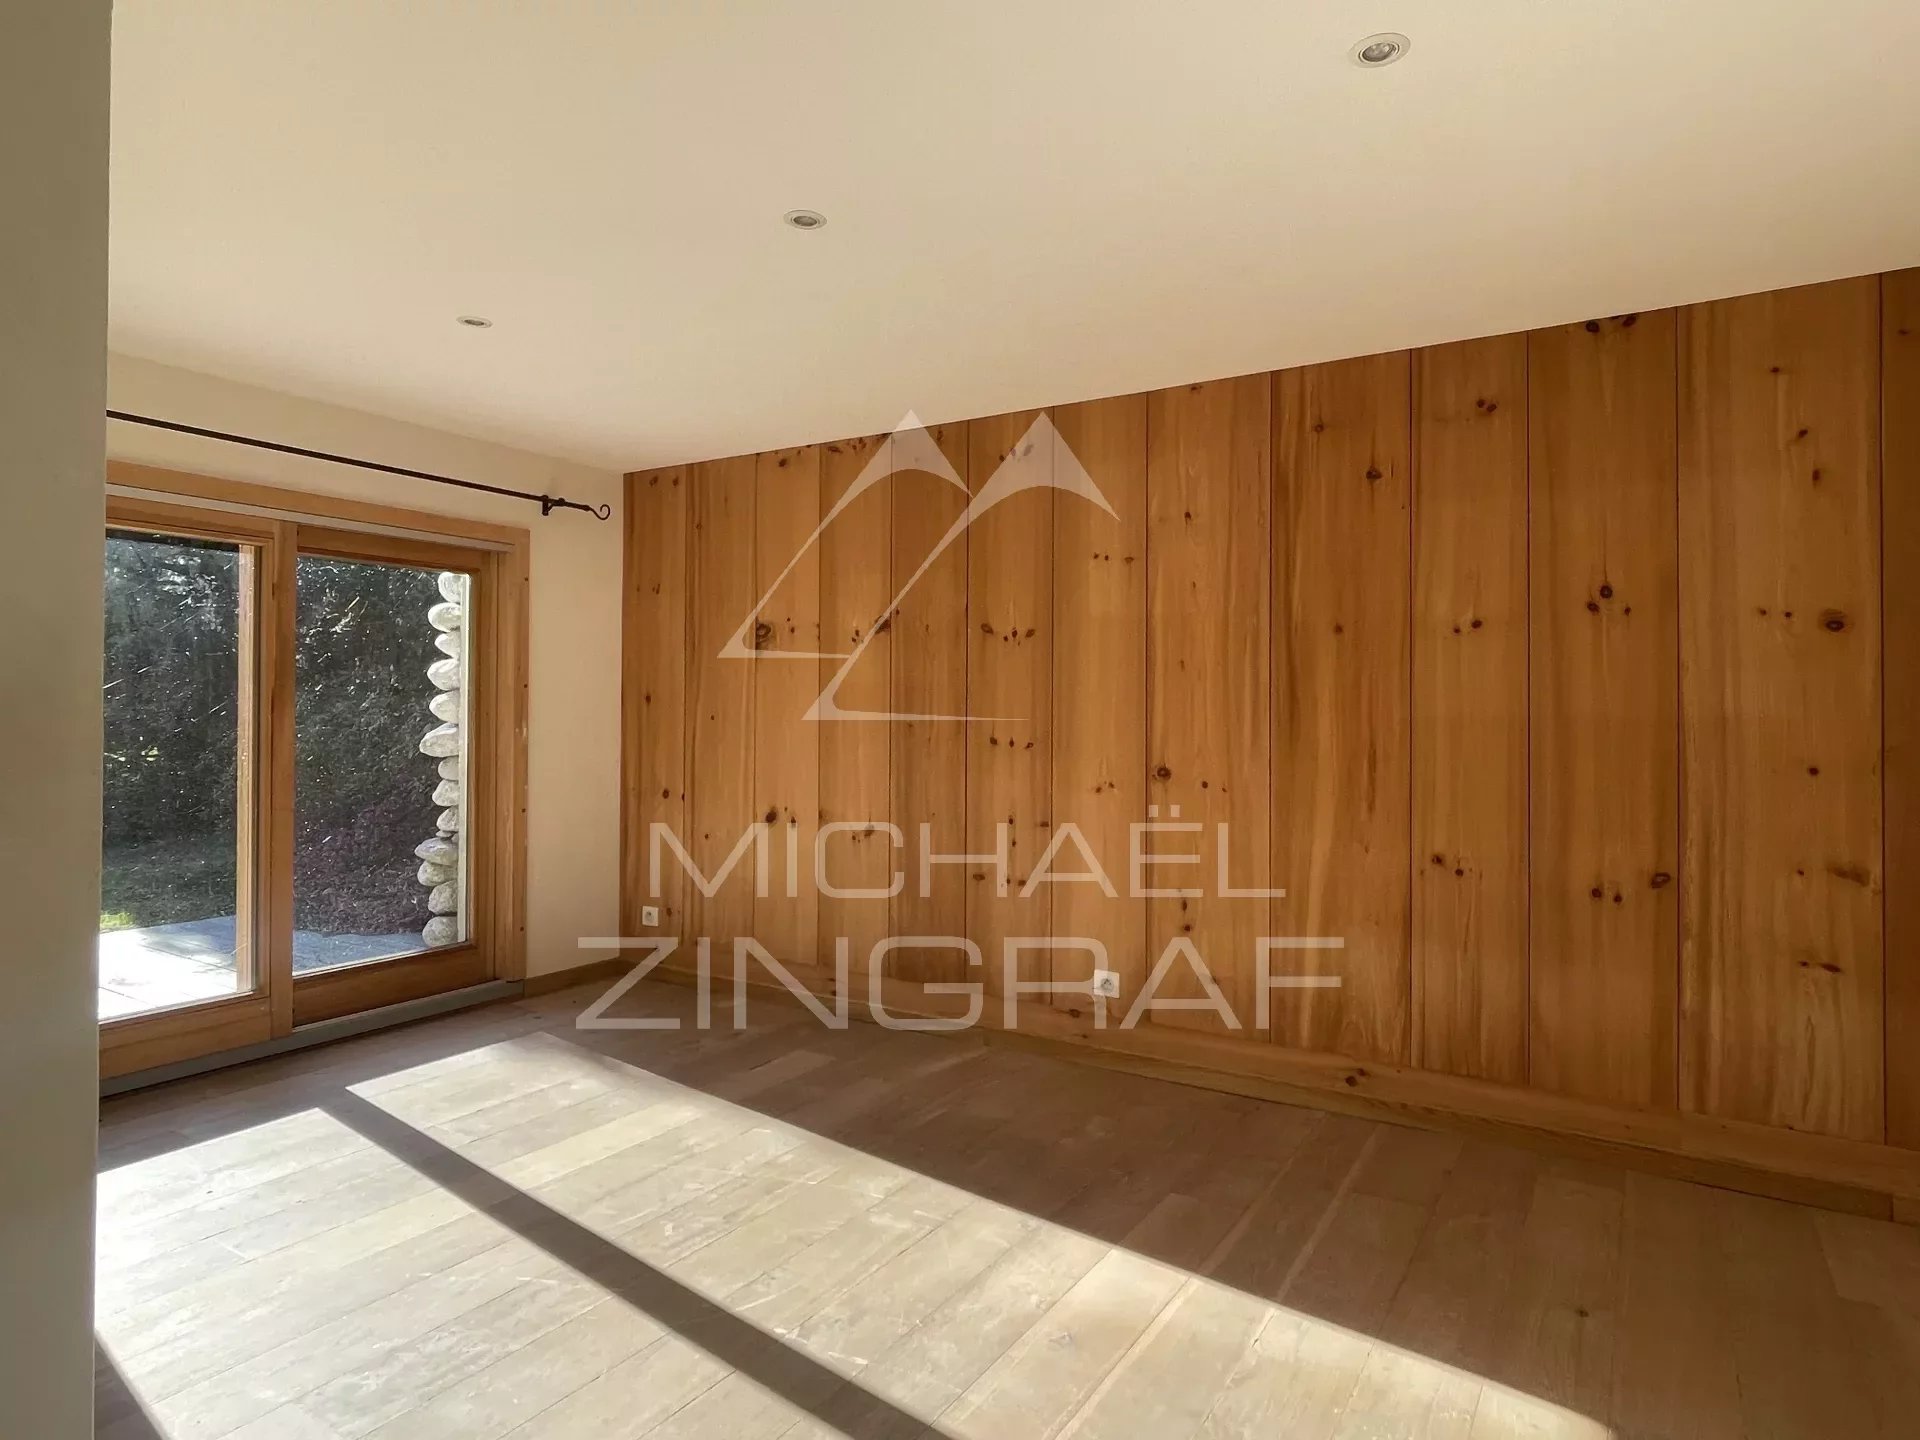 Les Houches - 5 bedrooms chalet